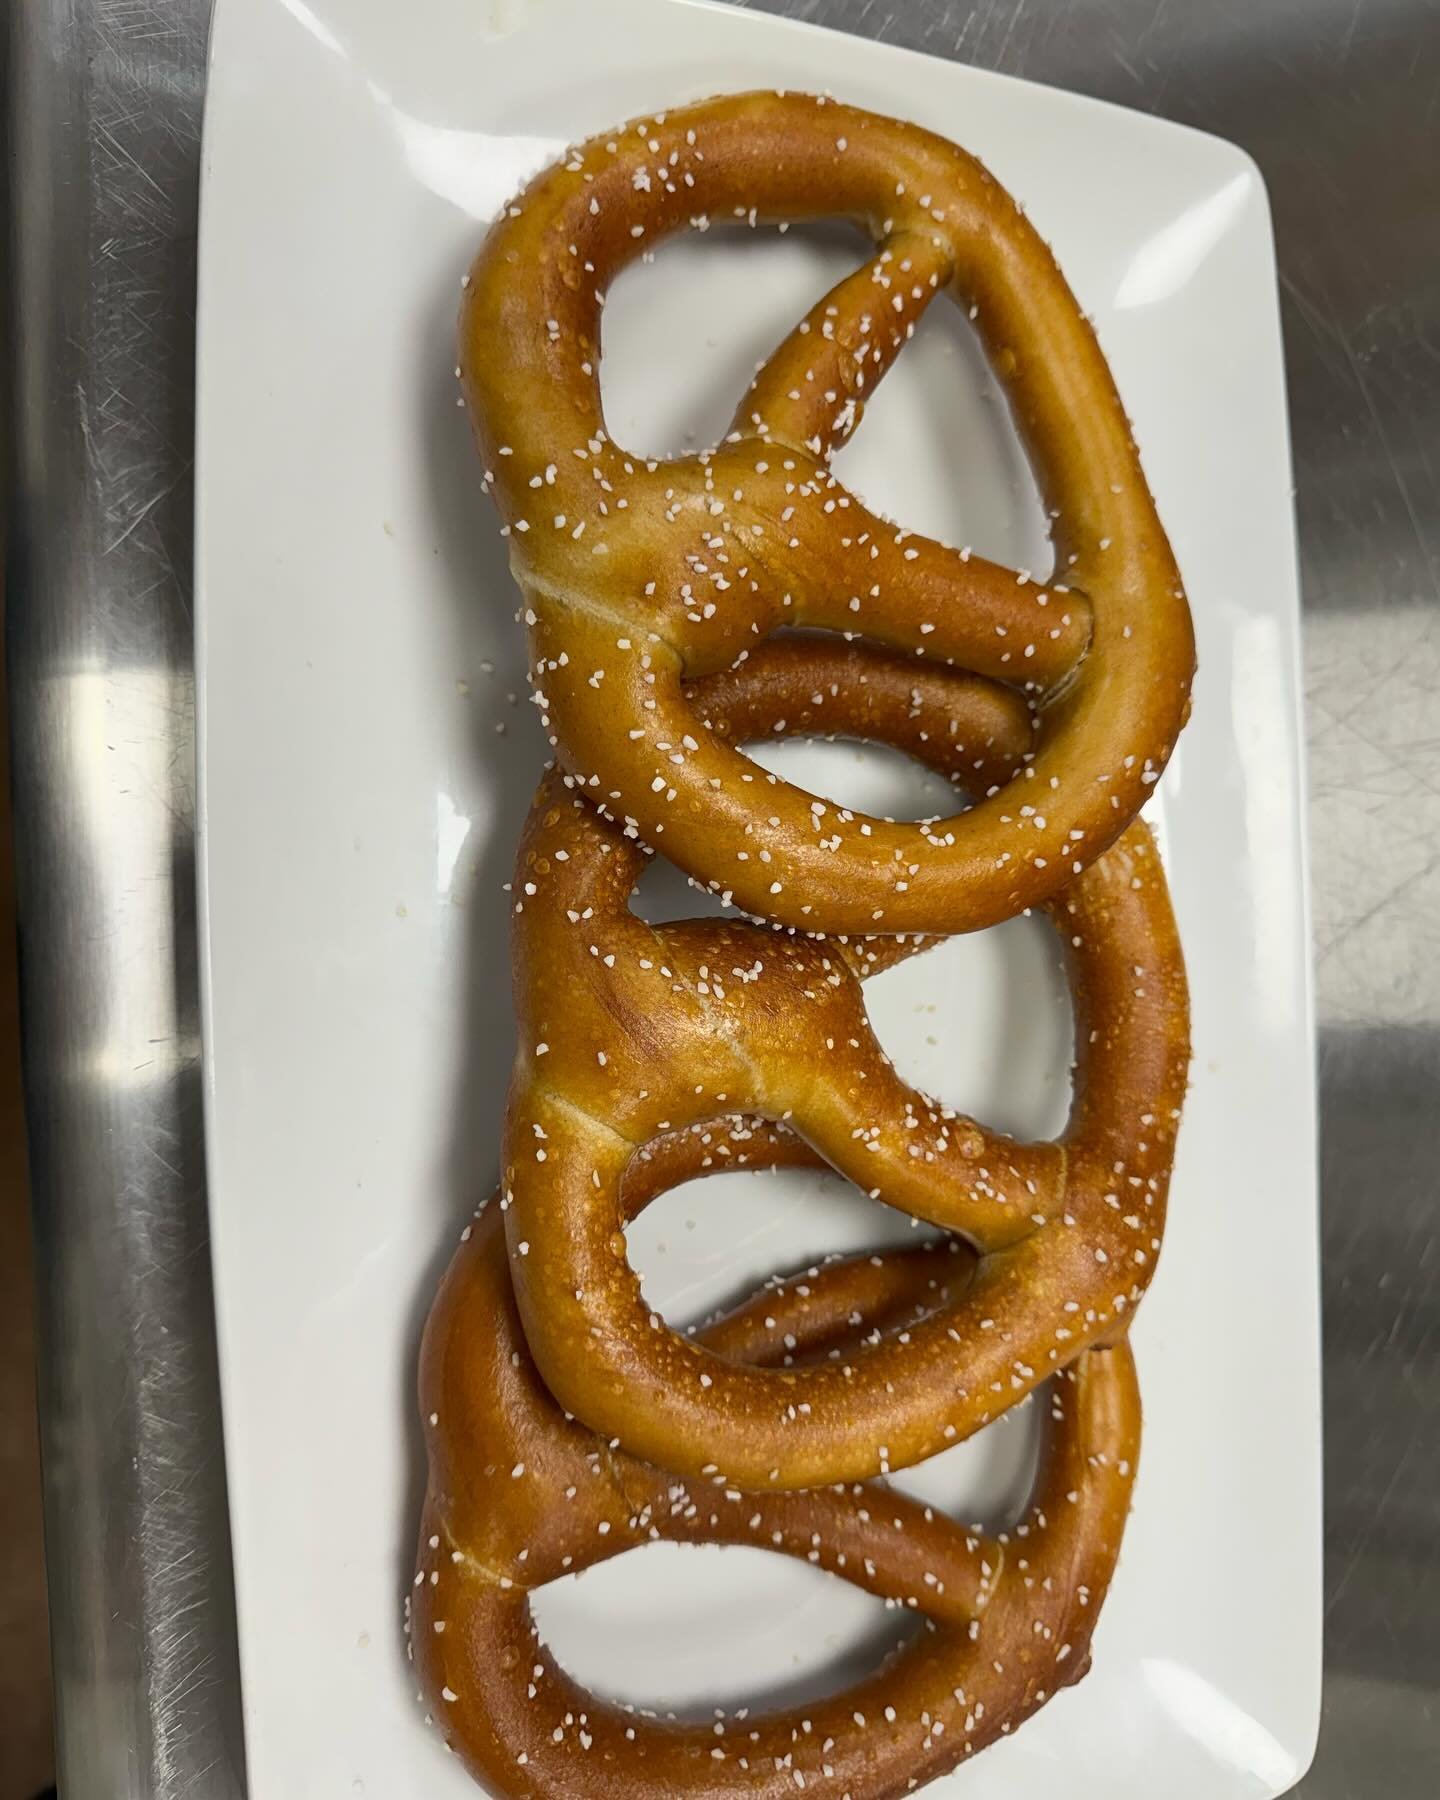 Fun Fact: The pretzel was invented by European monks in the early Middle Ages, possibly in the 6th or 7th century. The monks used the pretzel&rsquo;s distinctive knot shape to represent the Holy Trinity, with the three holes in the pretzel symbolizin